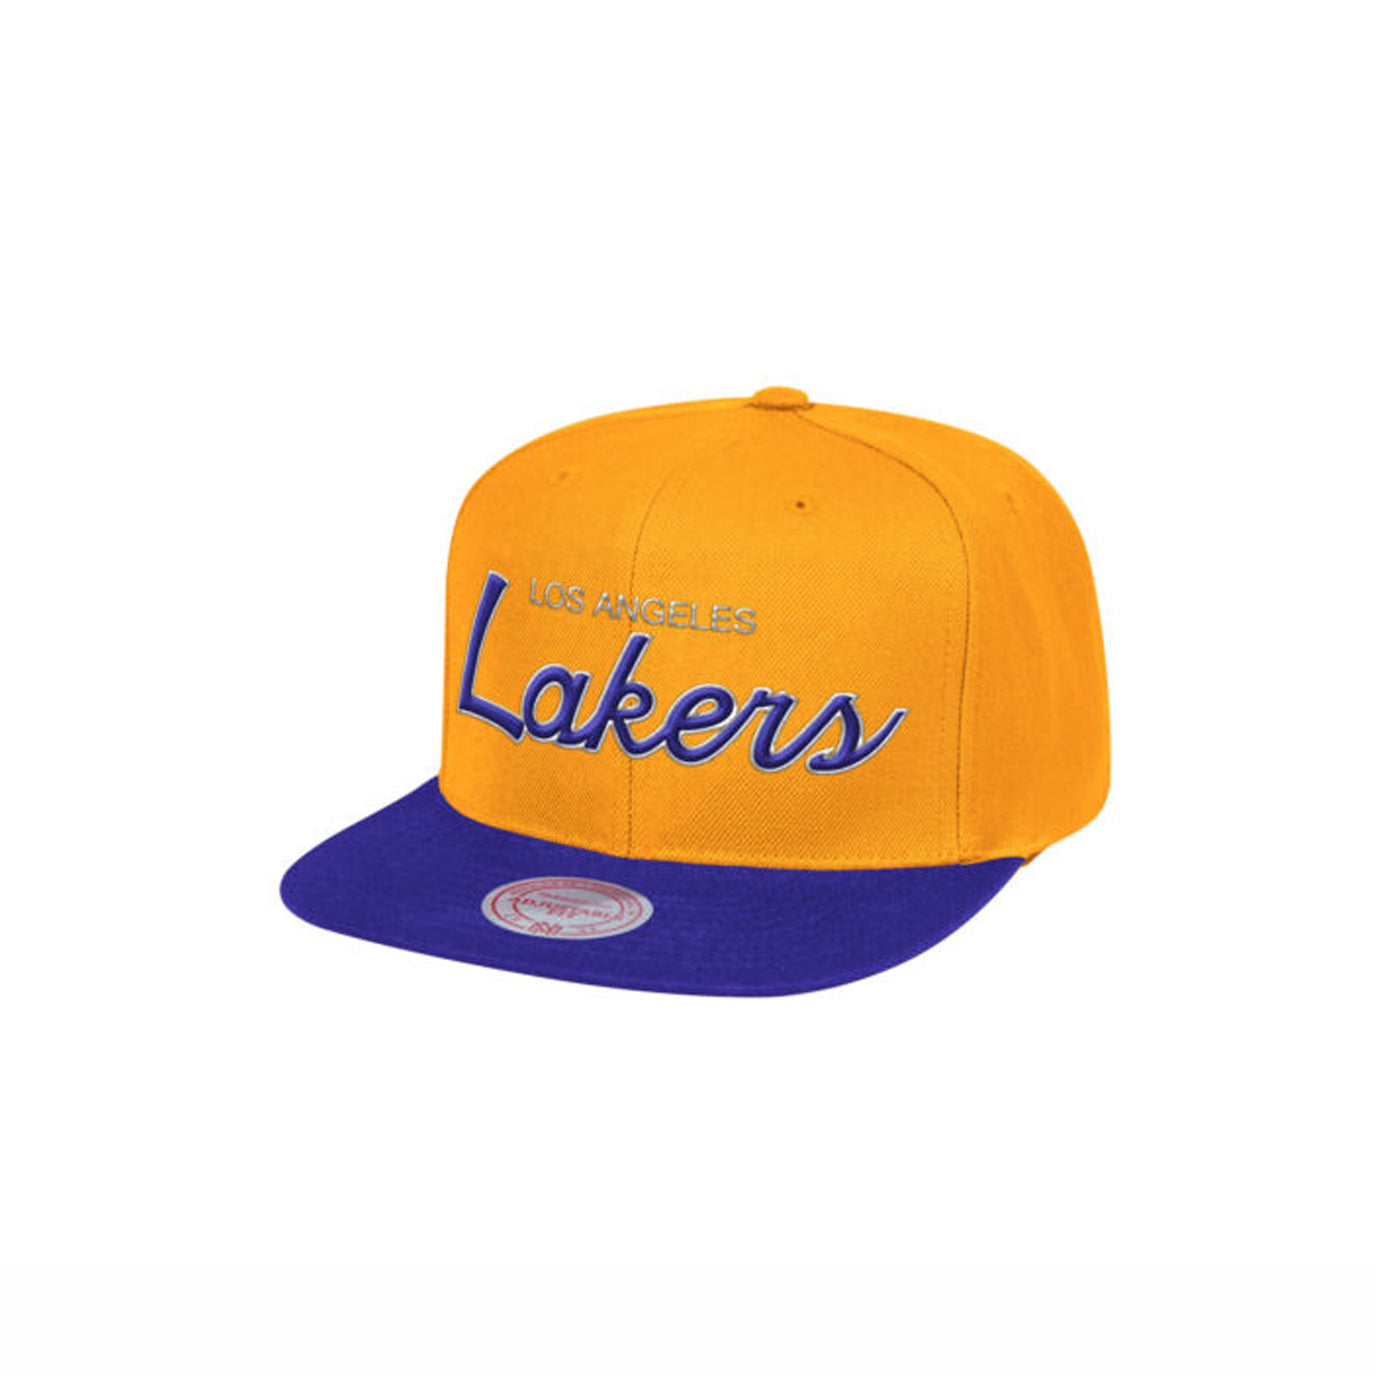 Mitchell & Ness Los Angeles LA Lakers Snapback Hat for Men -  White/Purple/Yellow - Basketball Cap for Men